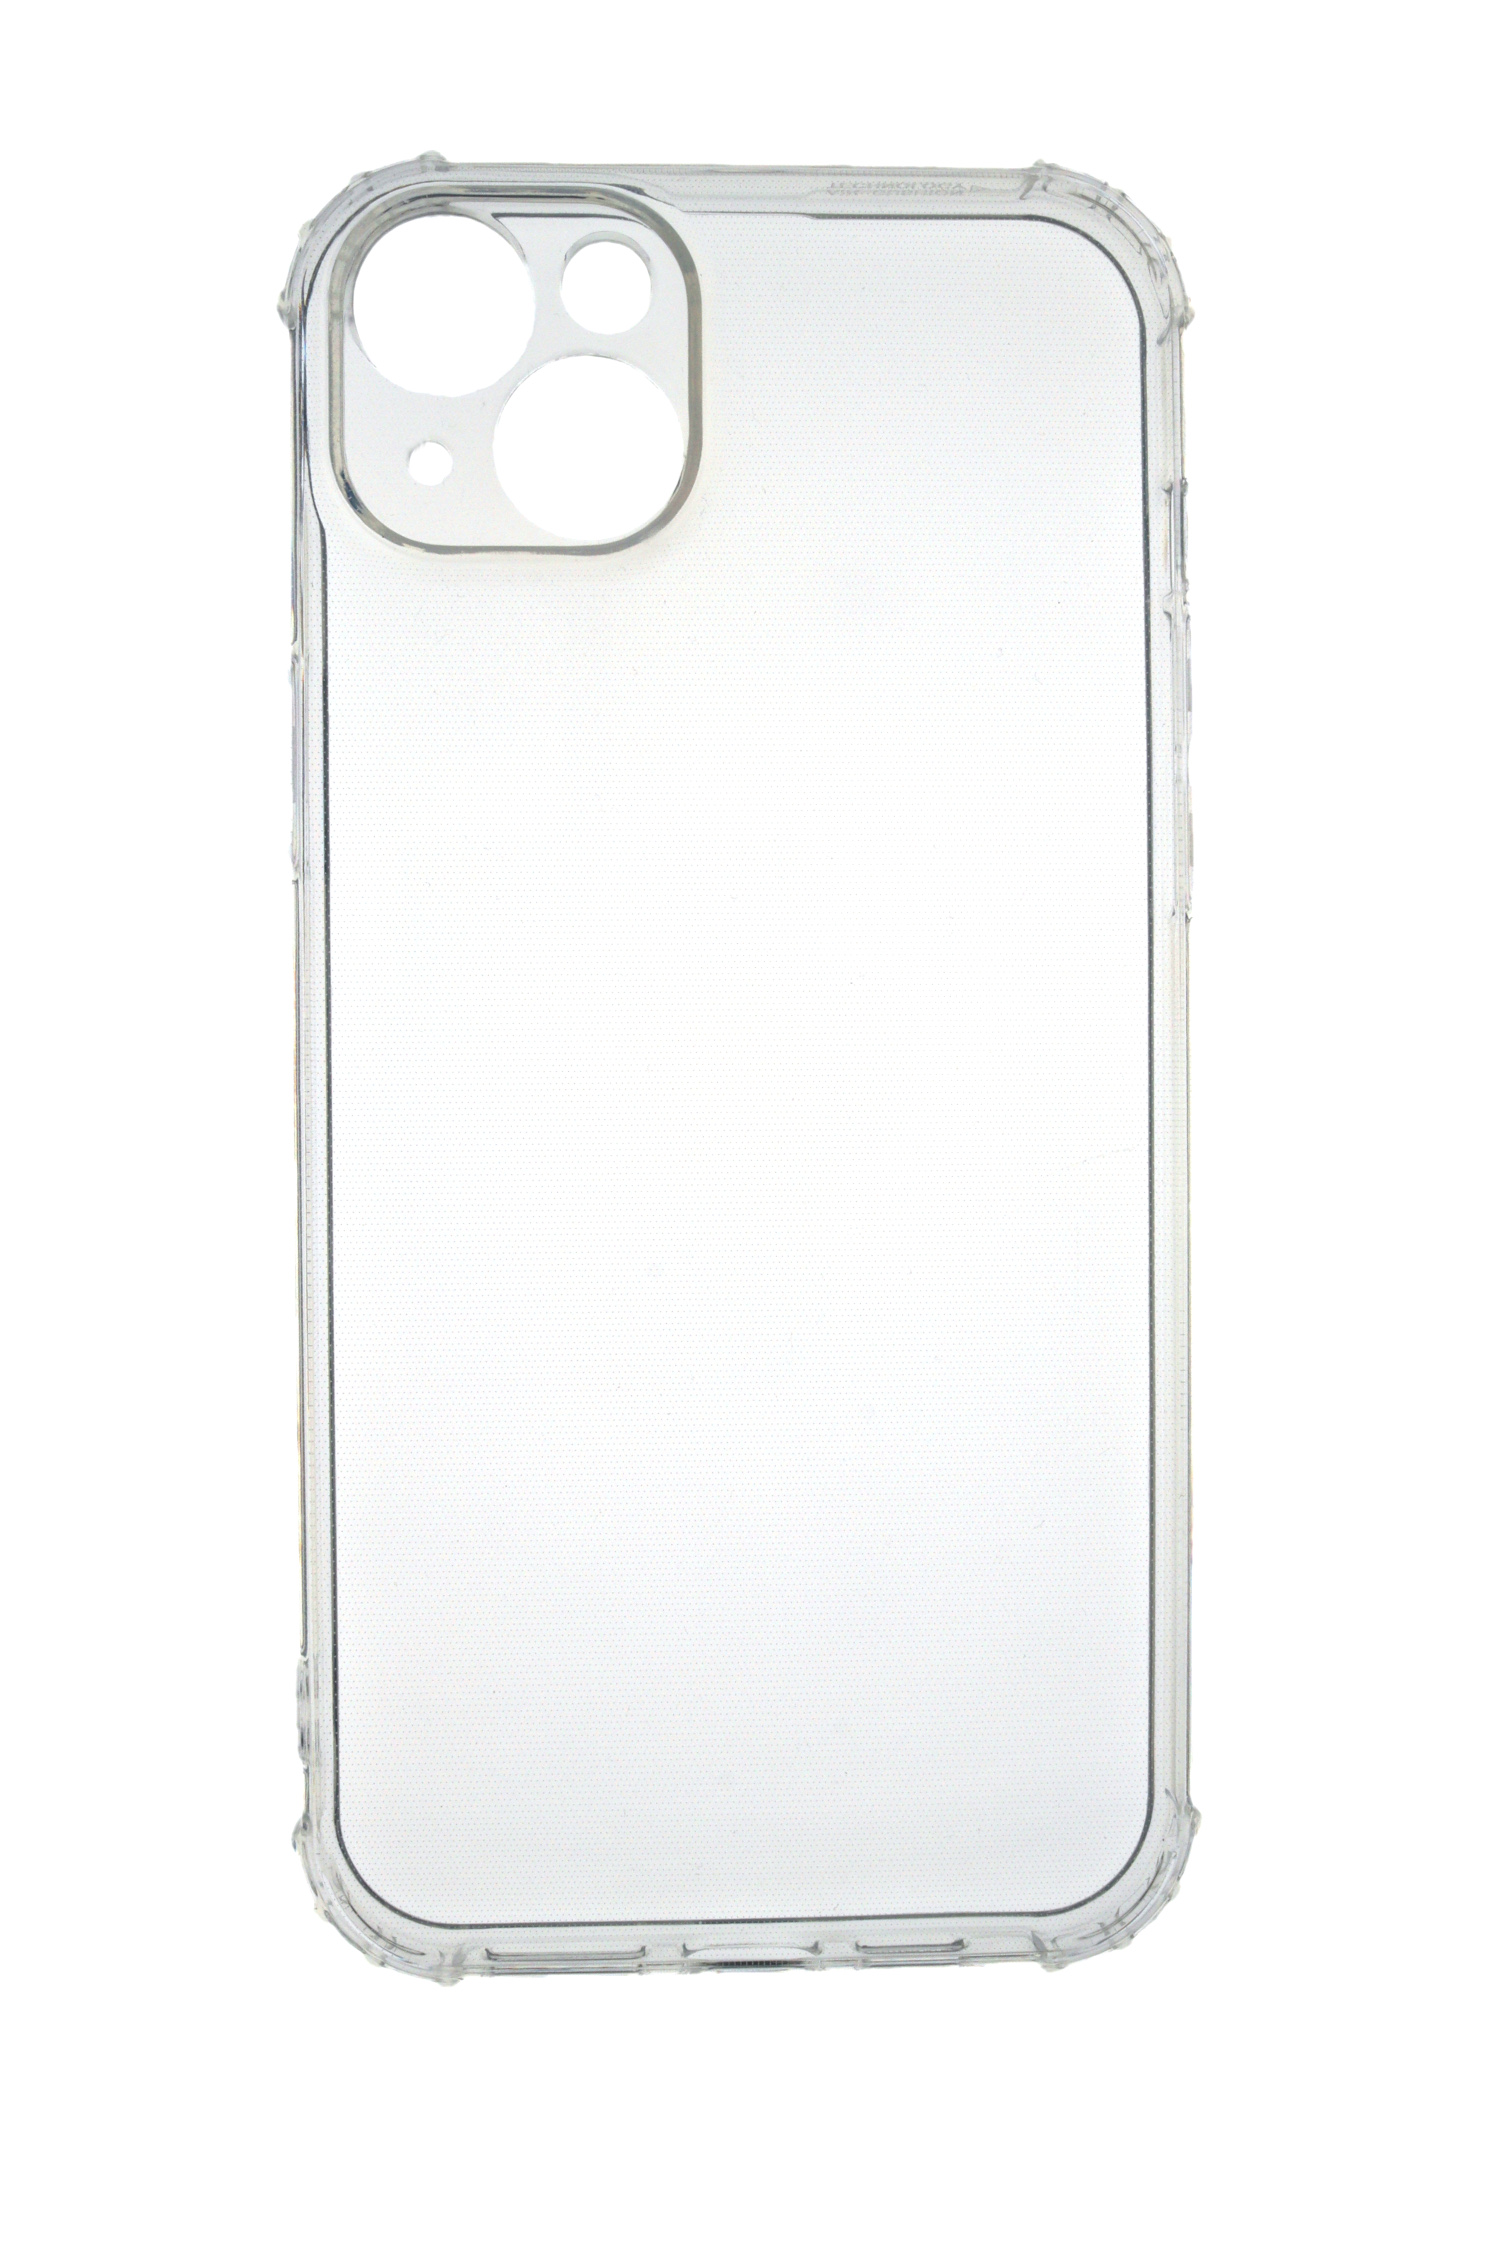 JAMCOVER Transparent iPhone Shock Backcover, Case, Anti 14 mm 1.5 Apple, Plus, TPU